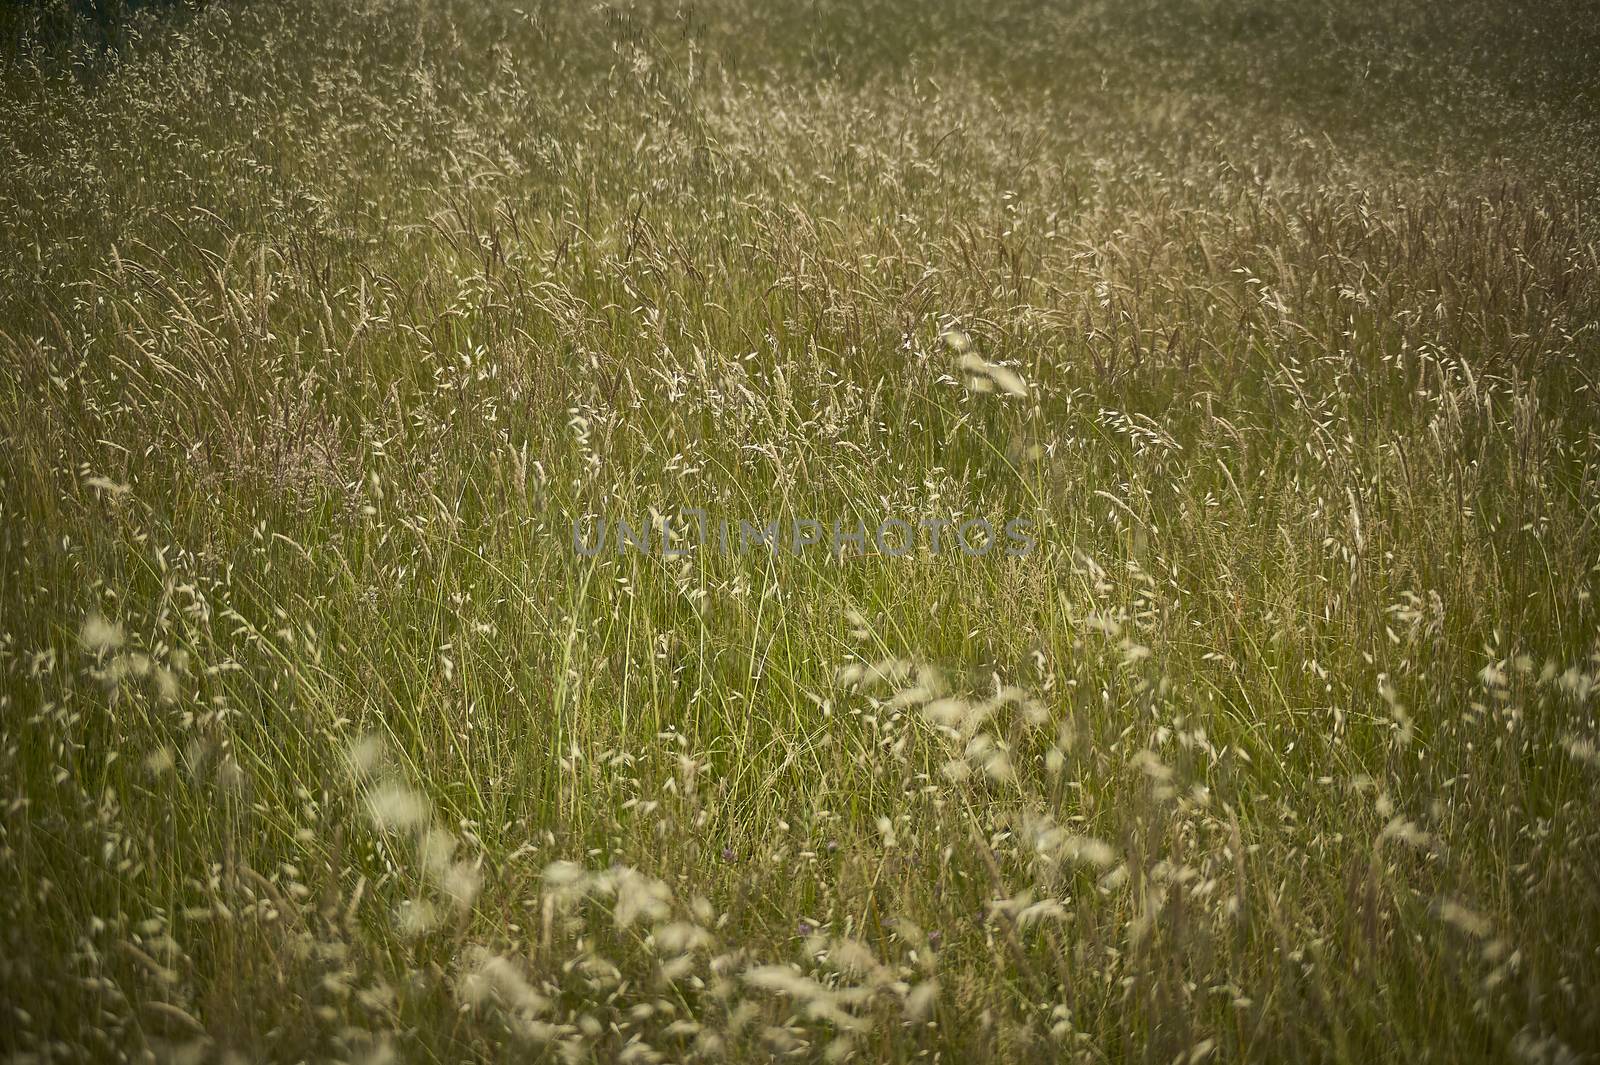 Texture of a field full of wild grass growing uncooked.